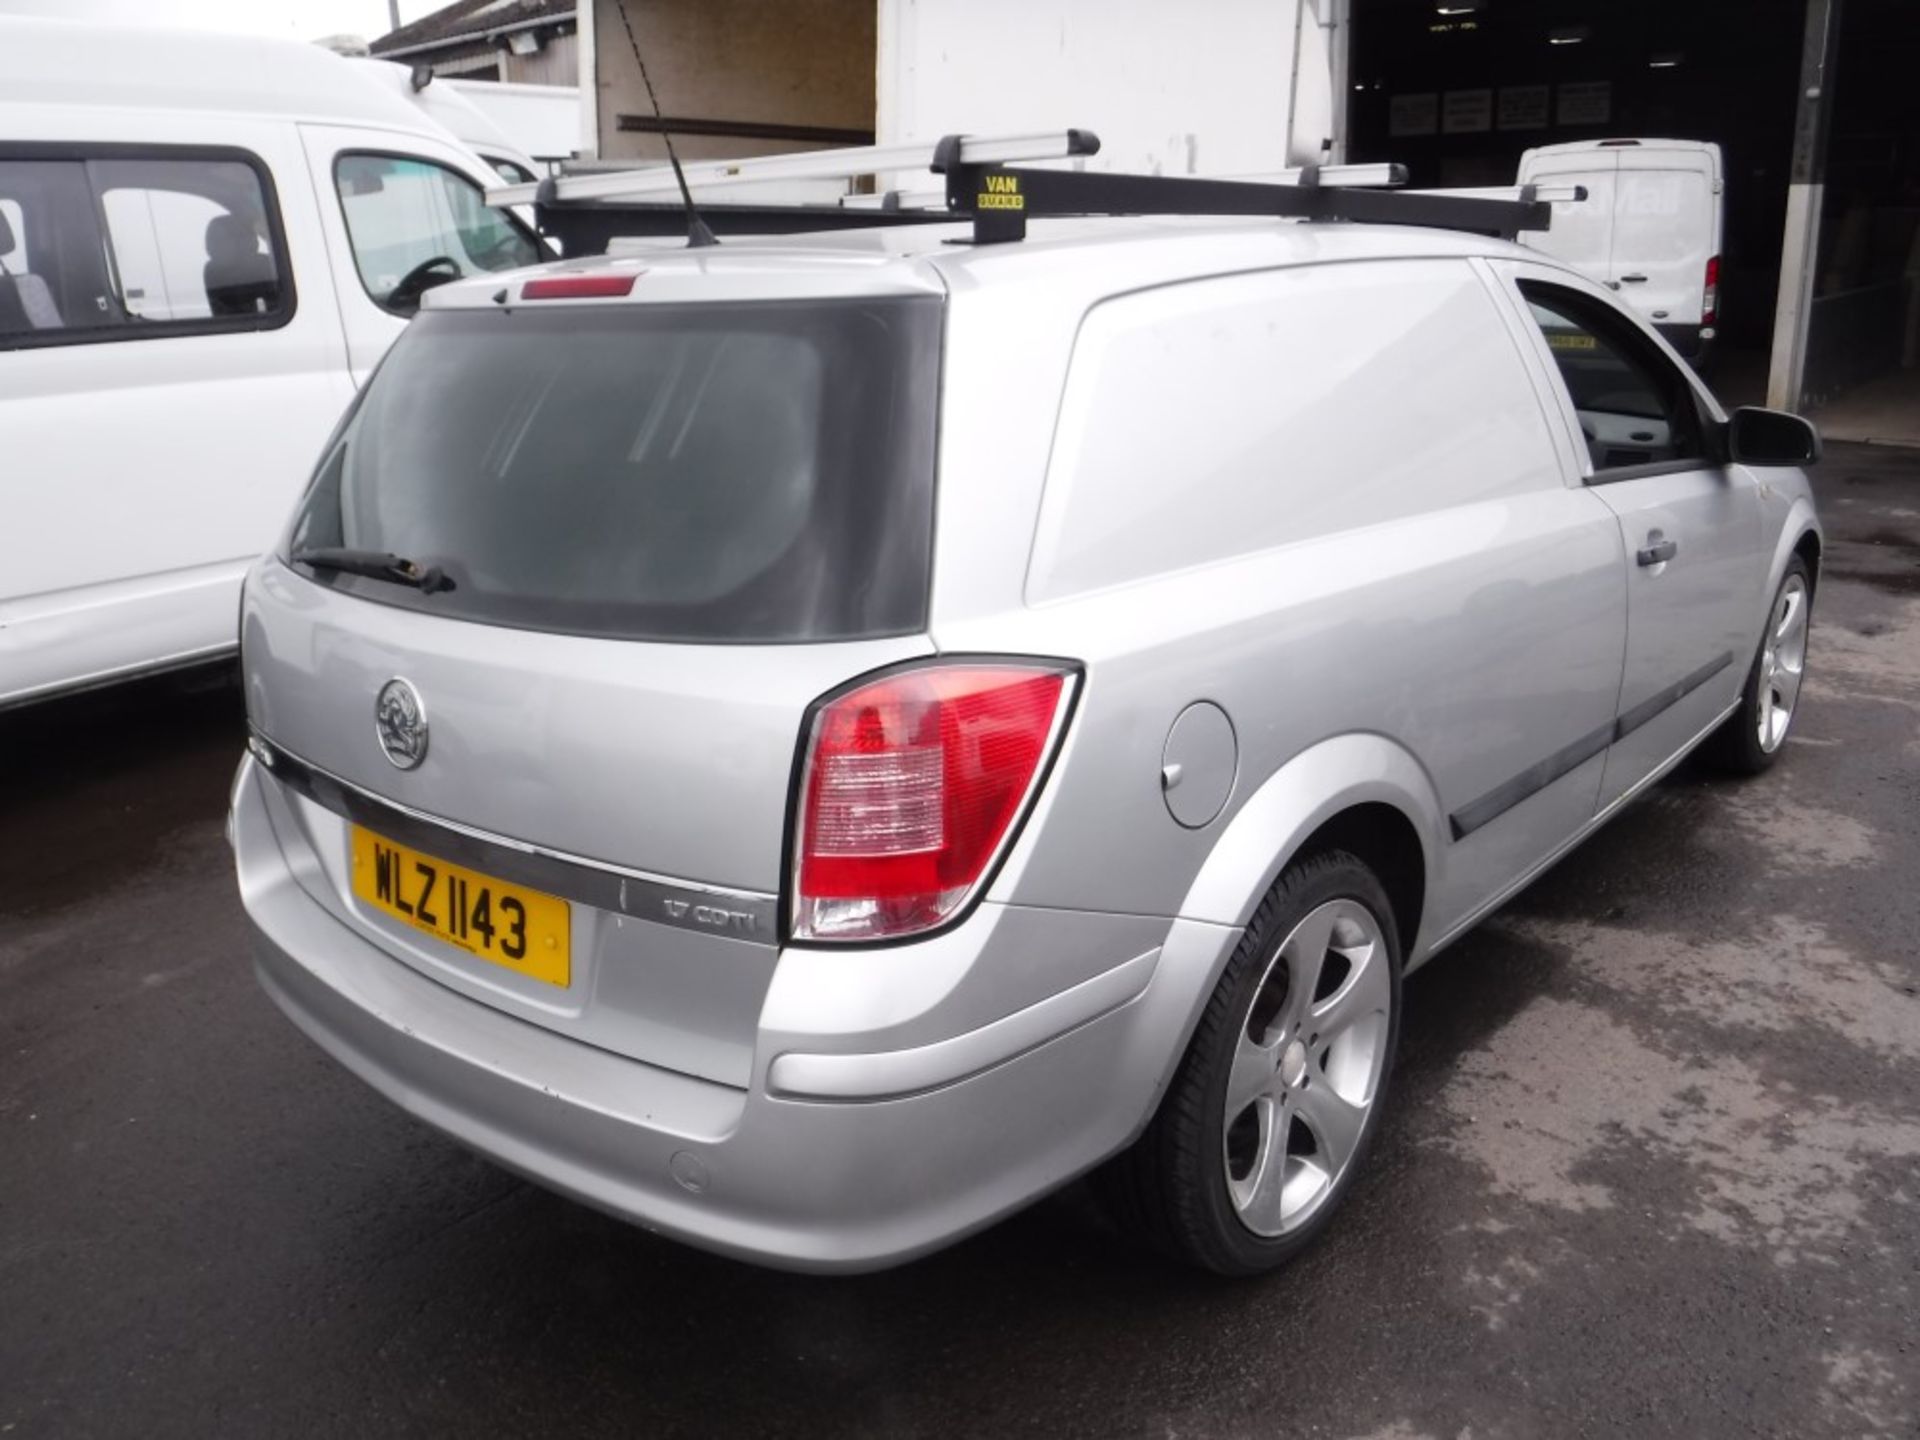 2008 VAUXHALL ASTRA CLUB CDTI VAN, 1ST REG 06/08, 107785M WARRANTED, V5 HERE, 1 FORMER KEEPER [NO - Image 4 of 5